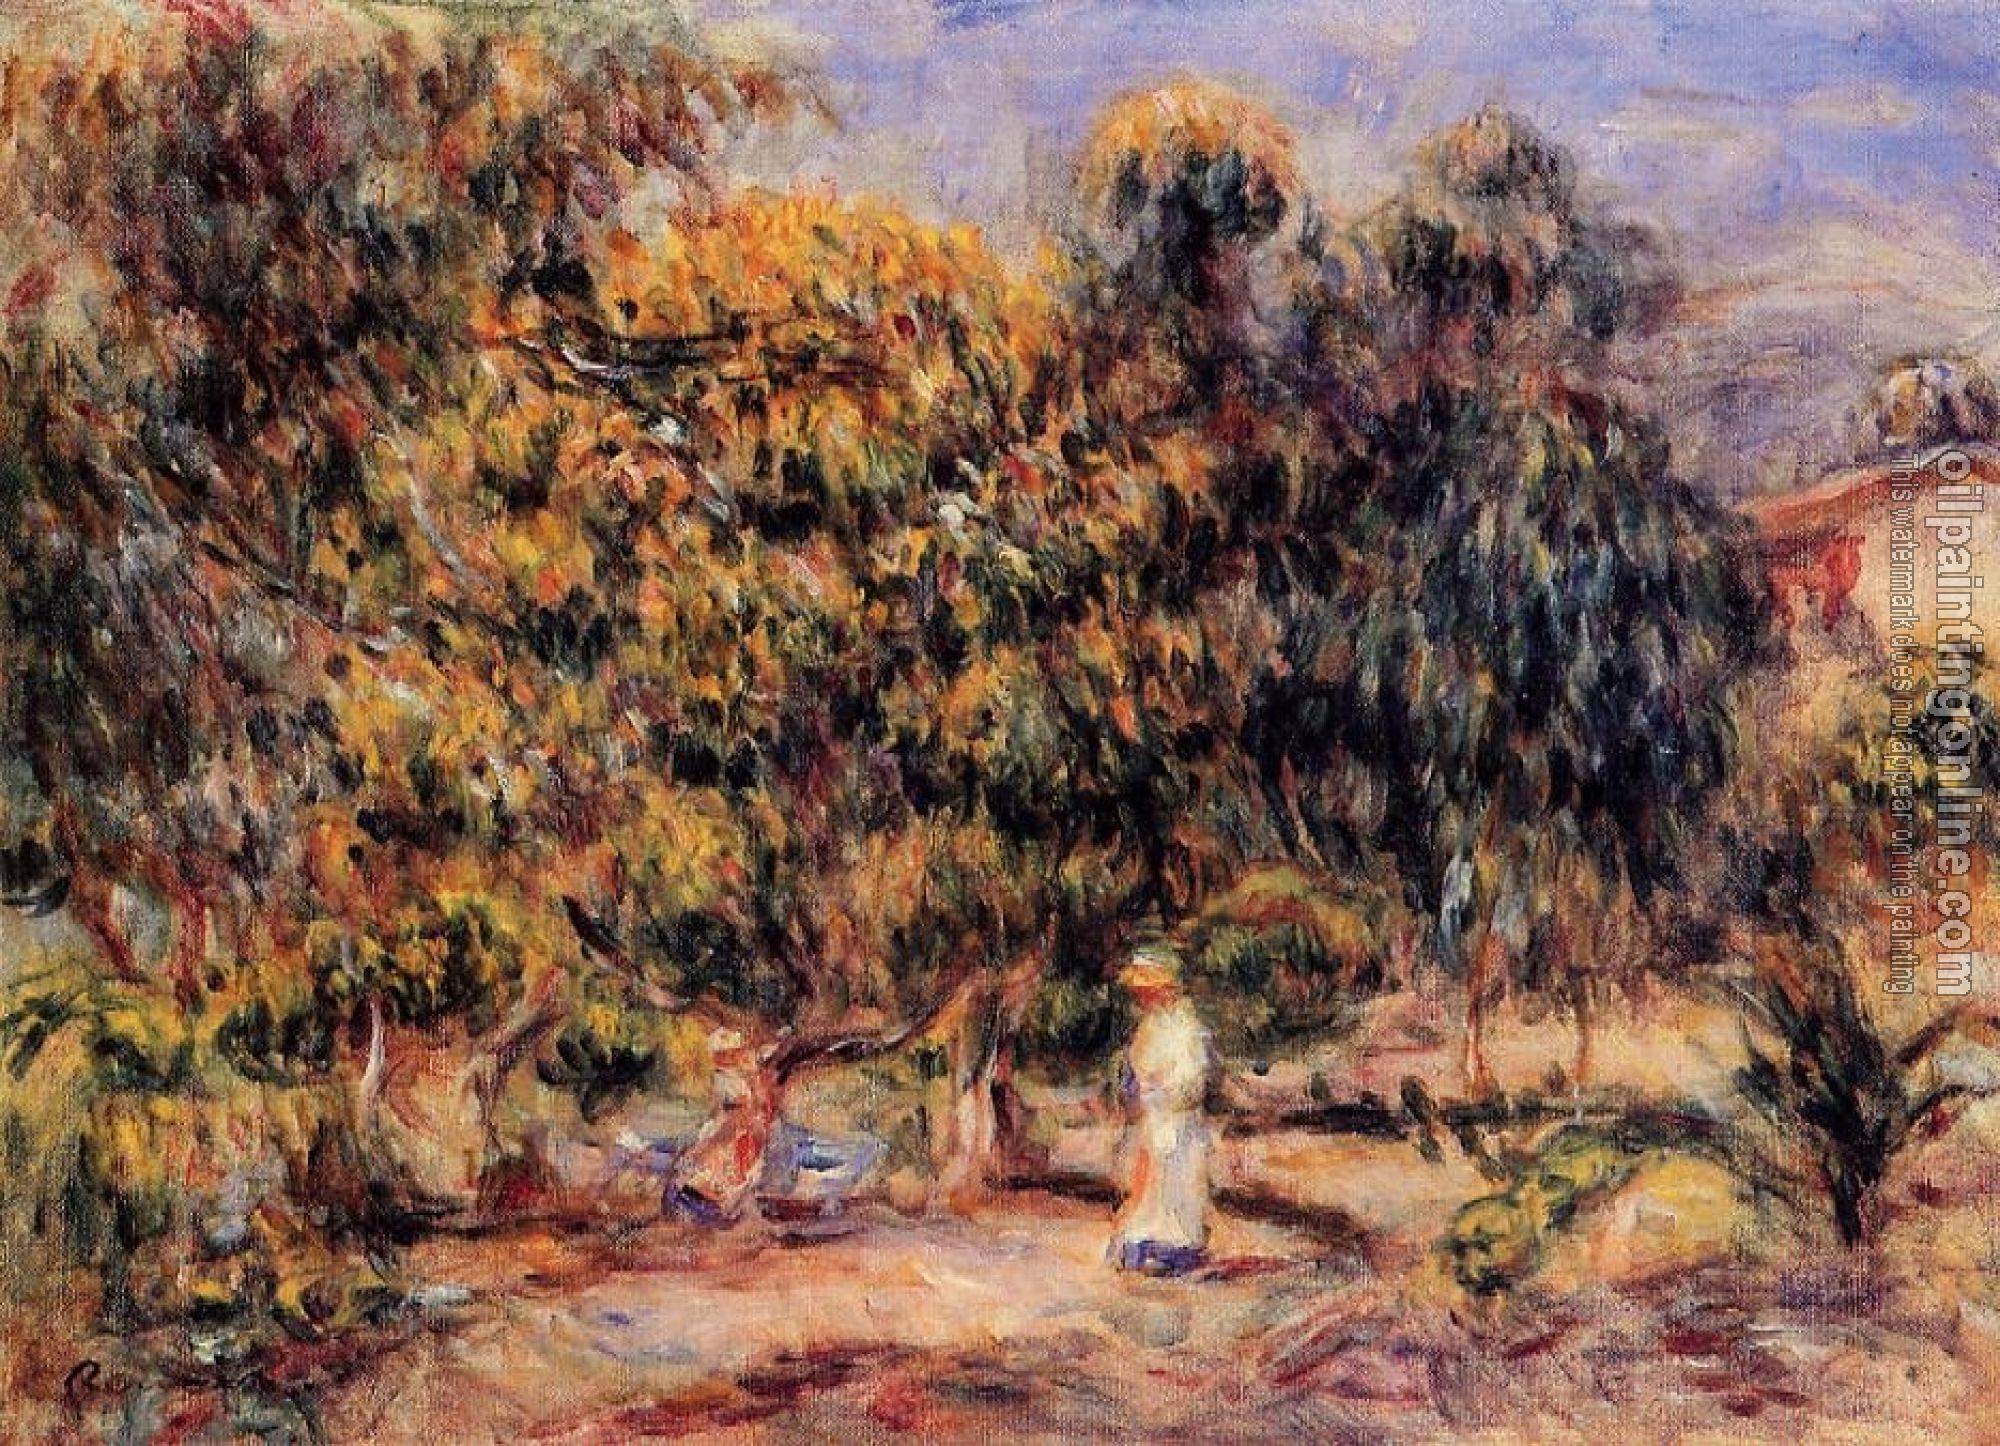 Renoir, Pierre Auguste - Woman in White in the Garden at Colettes